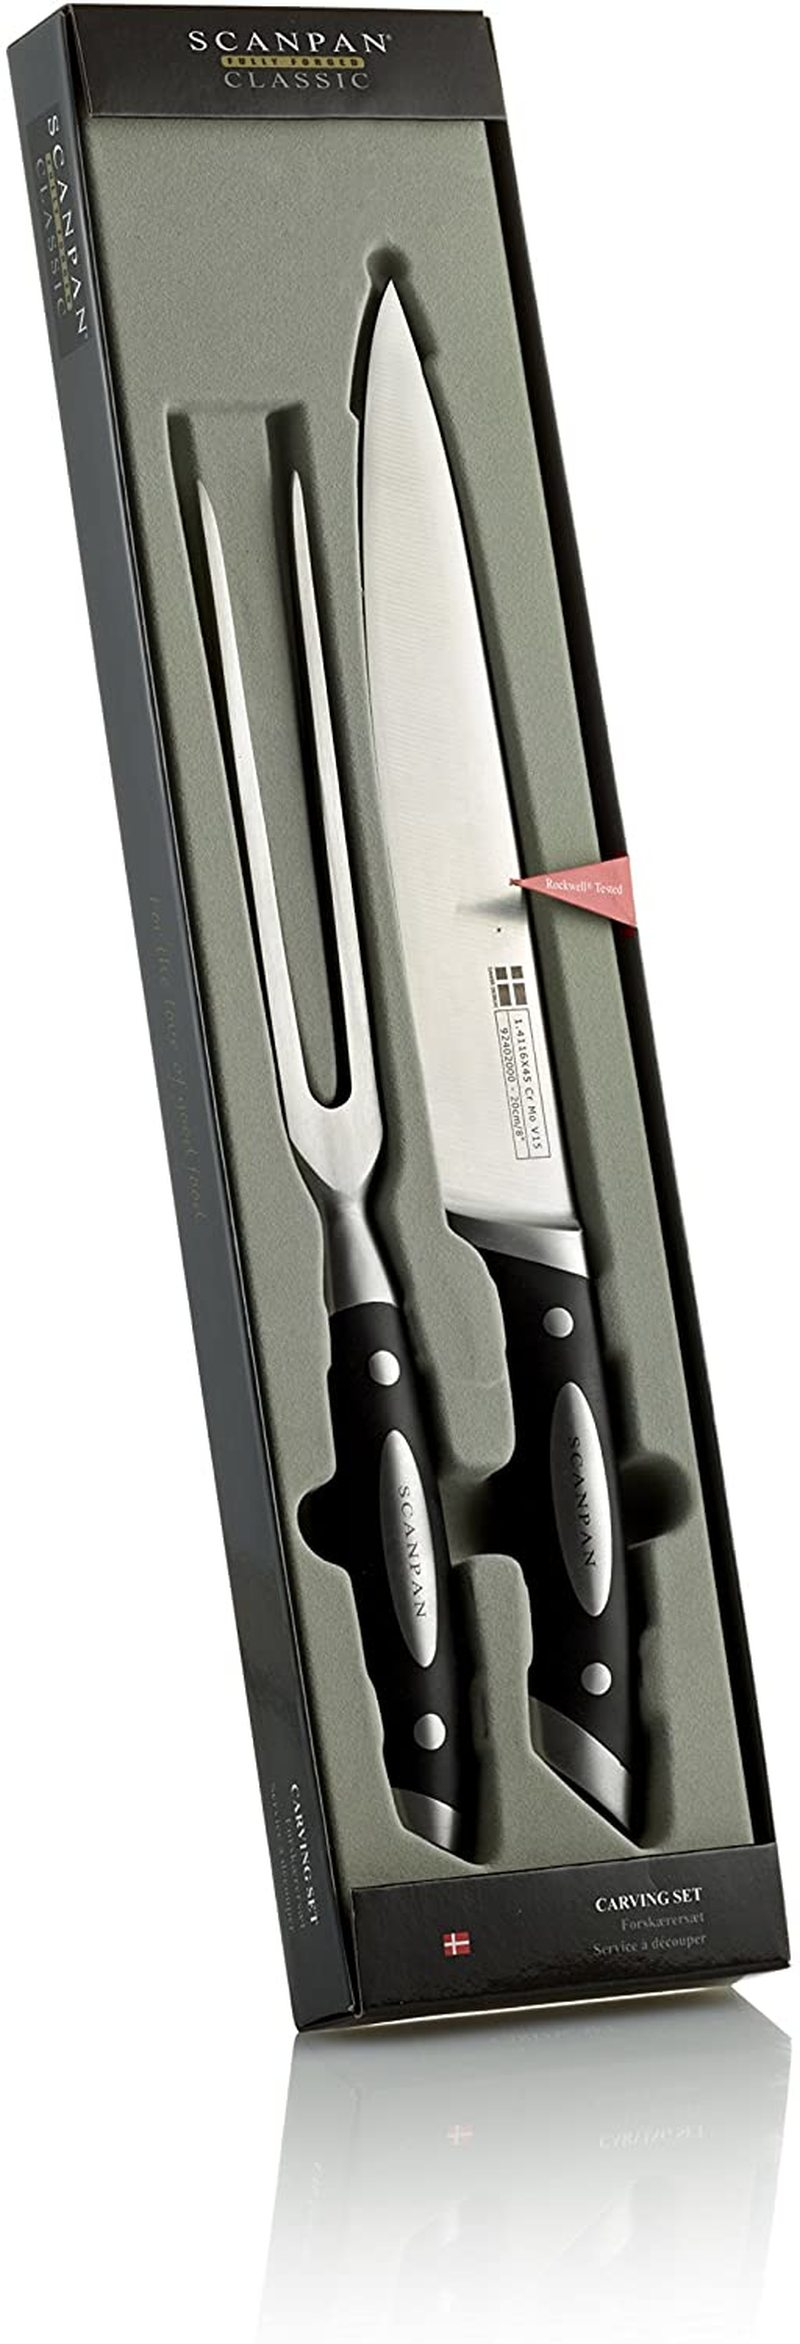 Scanpan Stainless Steel Maitre 2 Pieces Carving Set 